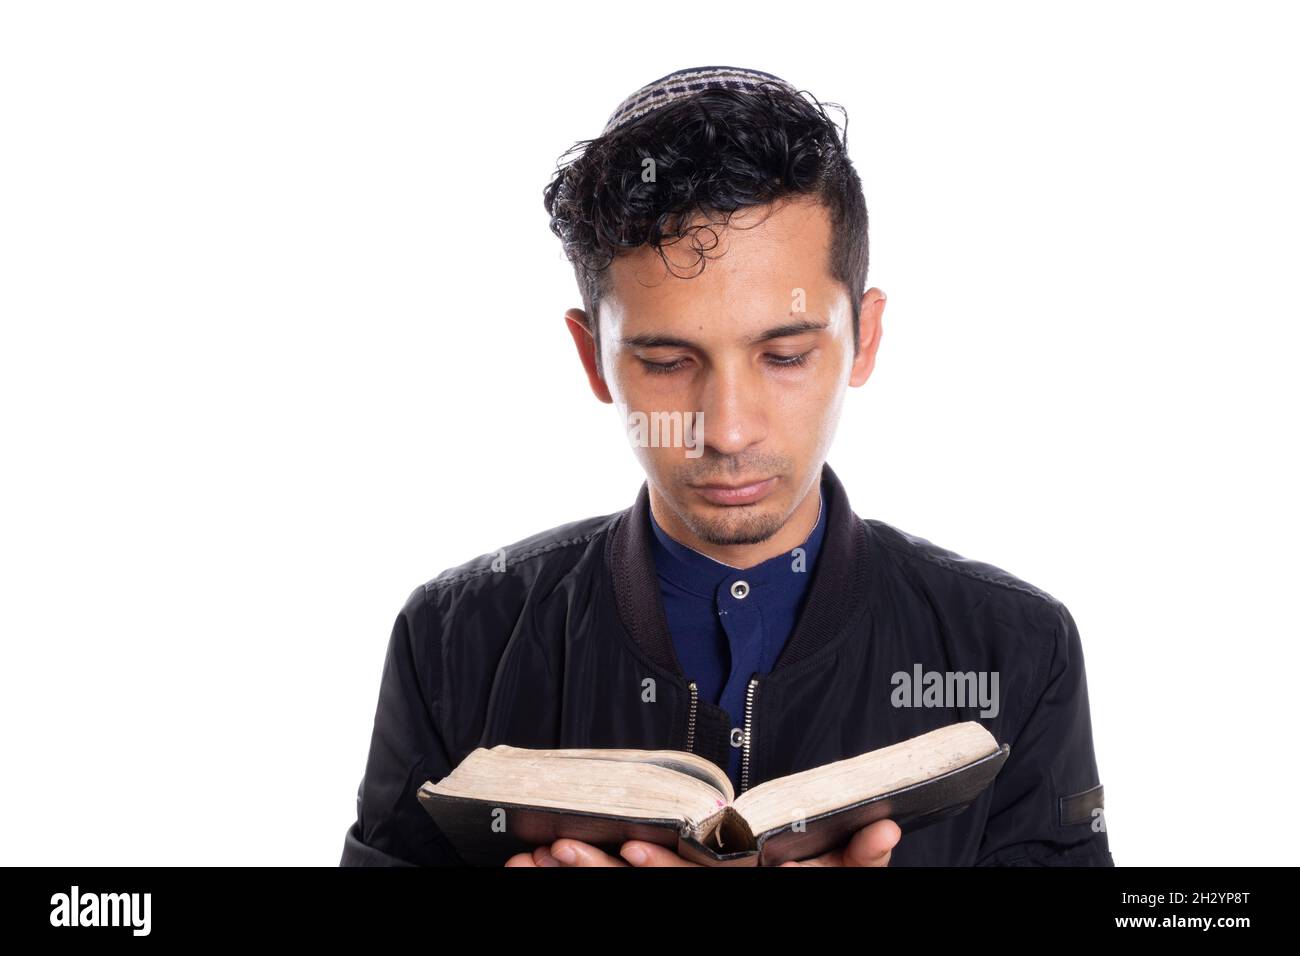 Latin man practicing Judaism isolated on white background. Young man with kippah reading bible. Stock Photo